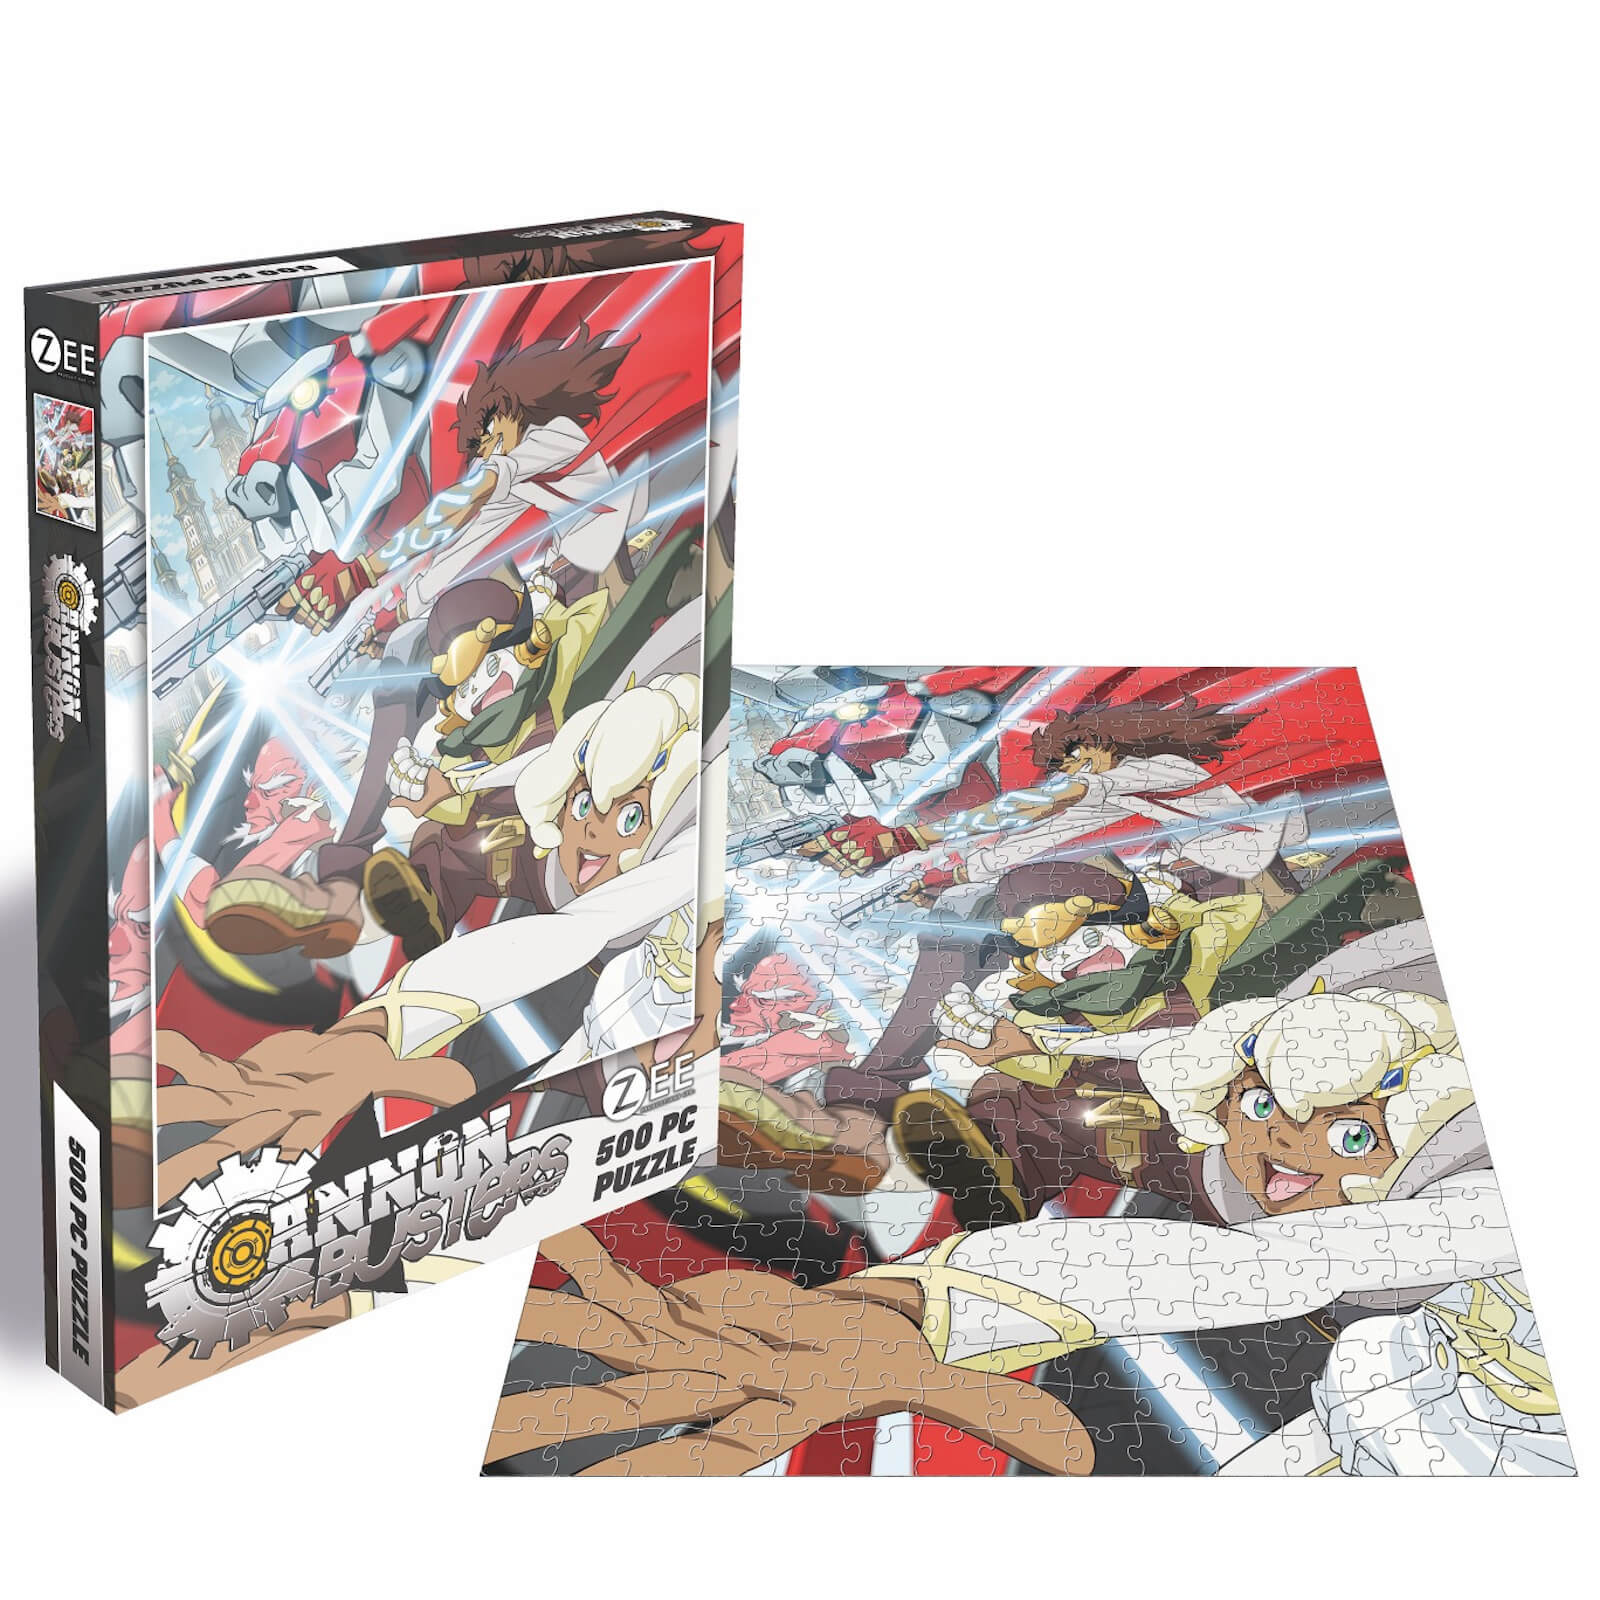 Cannon Busters Cannon Busters (500 Piece Jigsaw Puzzle)